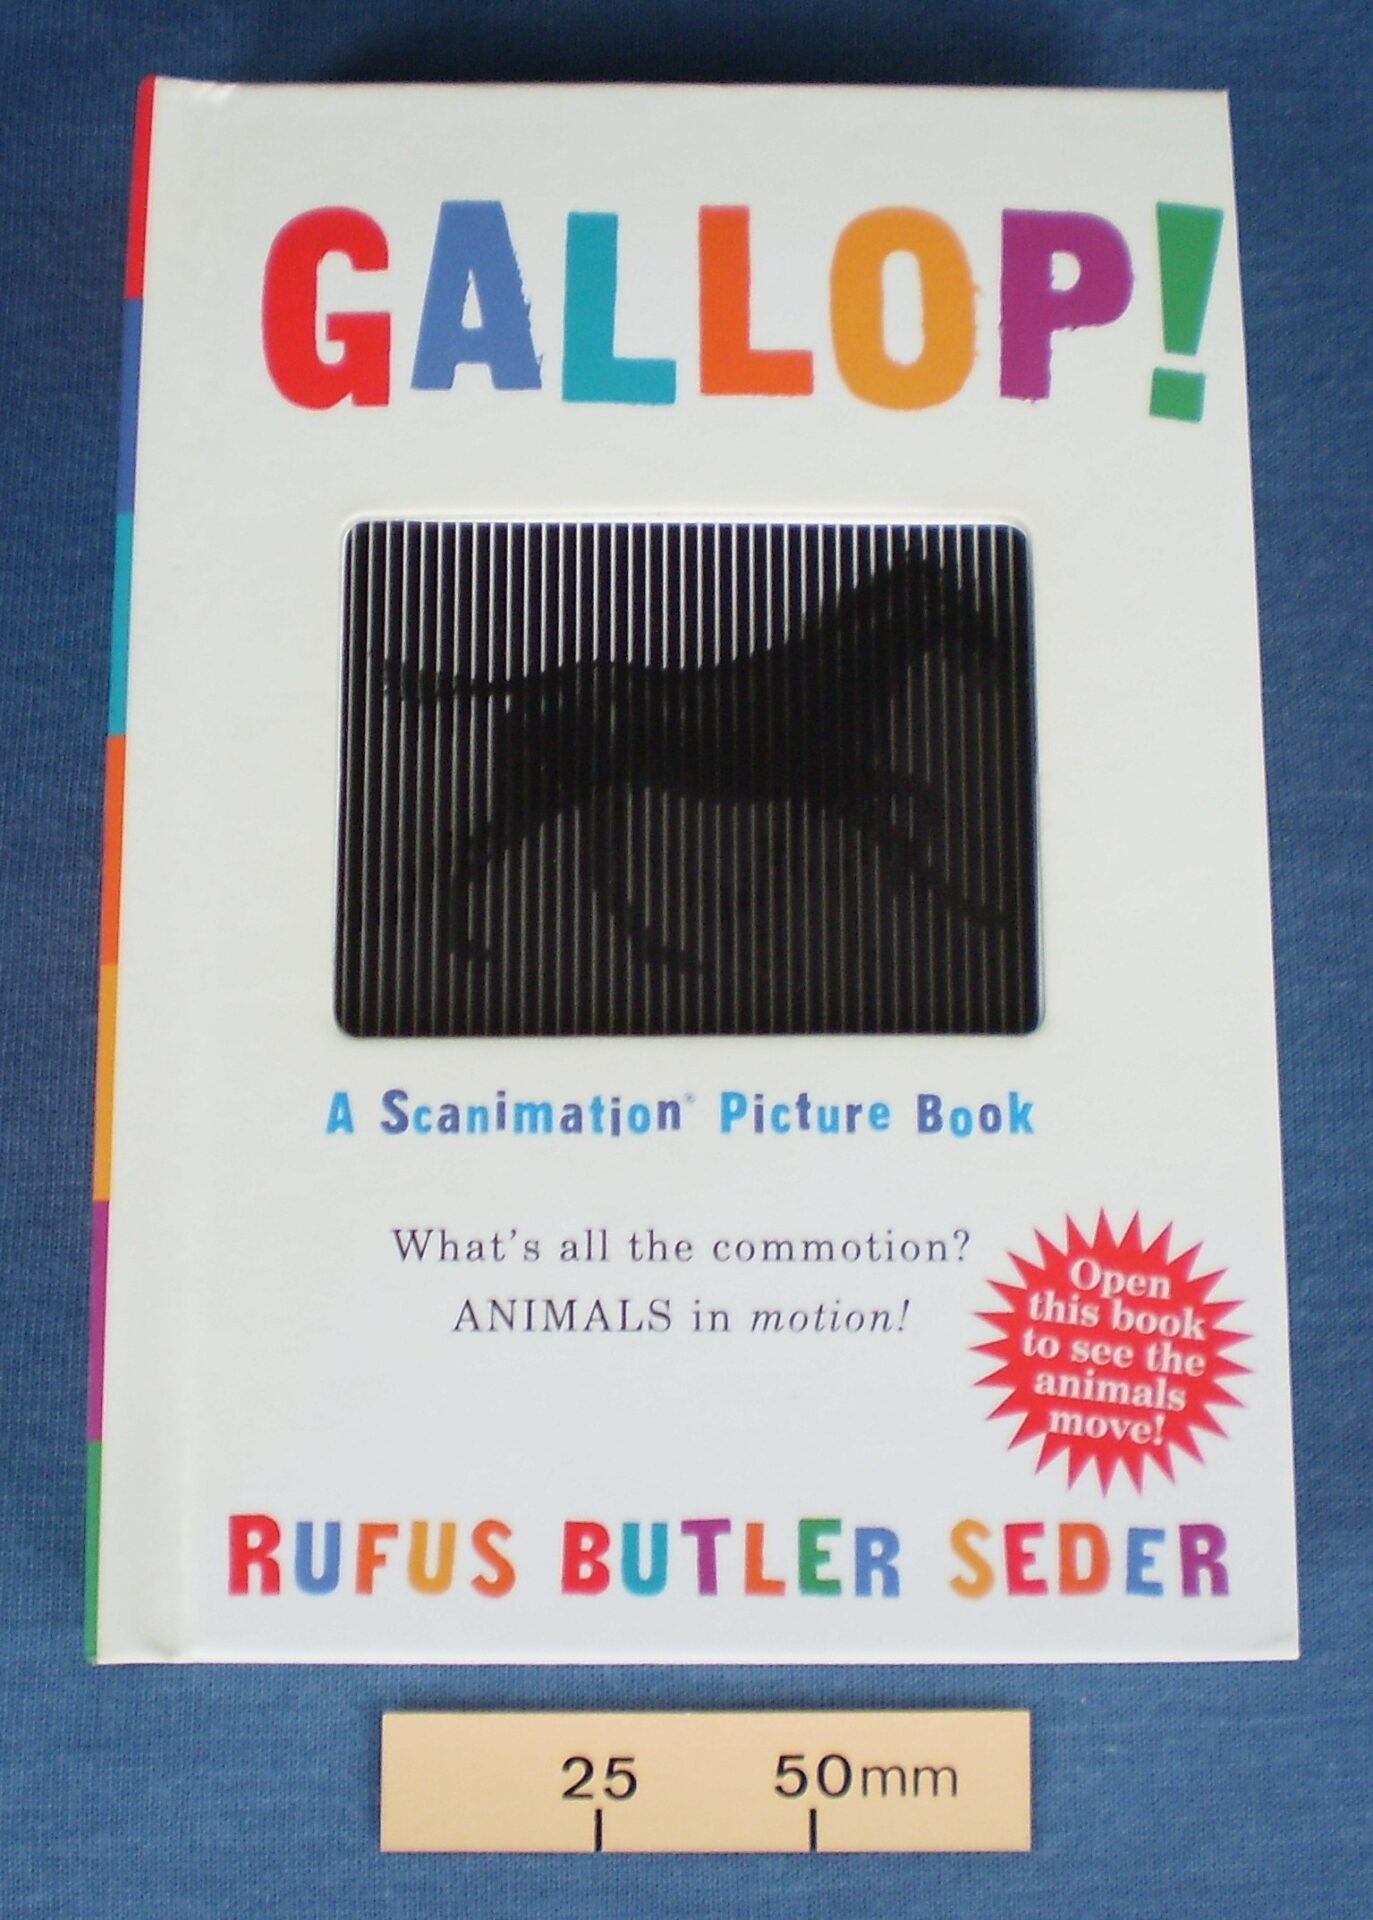 ‘Gallop!’ A Scanimation Picture Book by Rufus Butler Seder